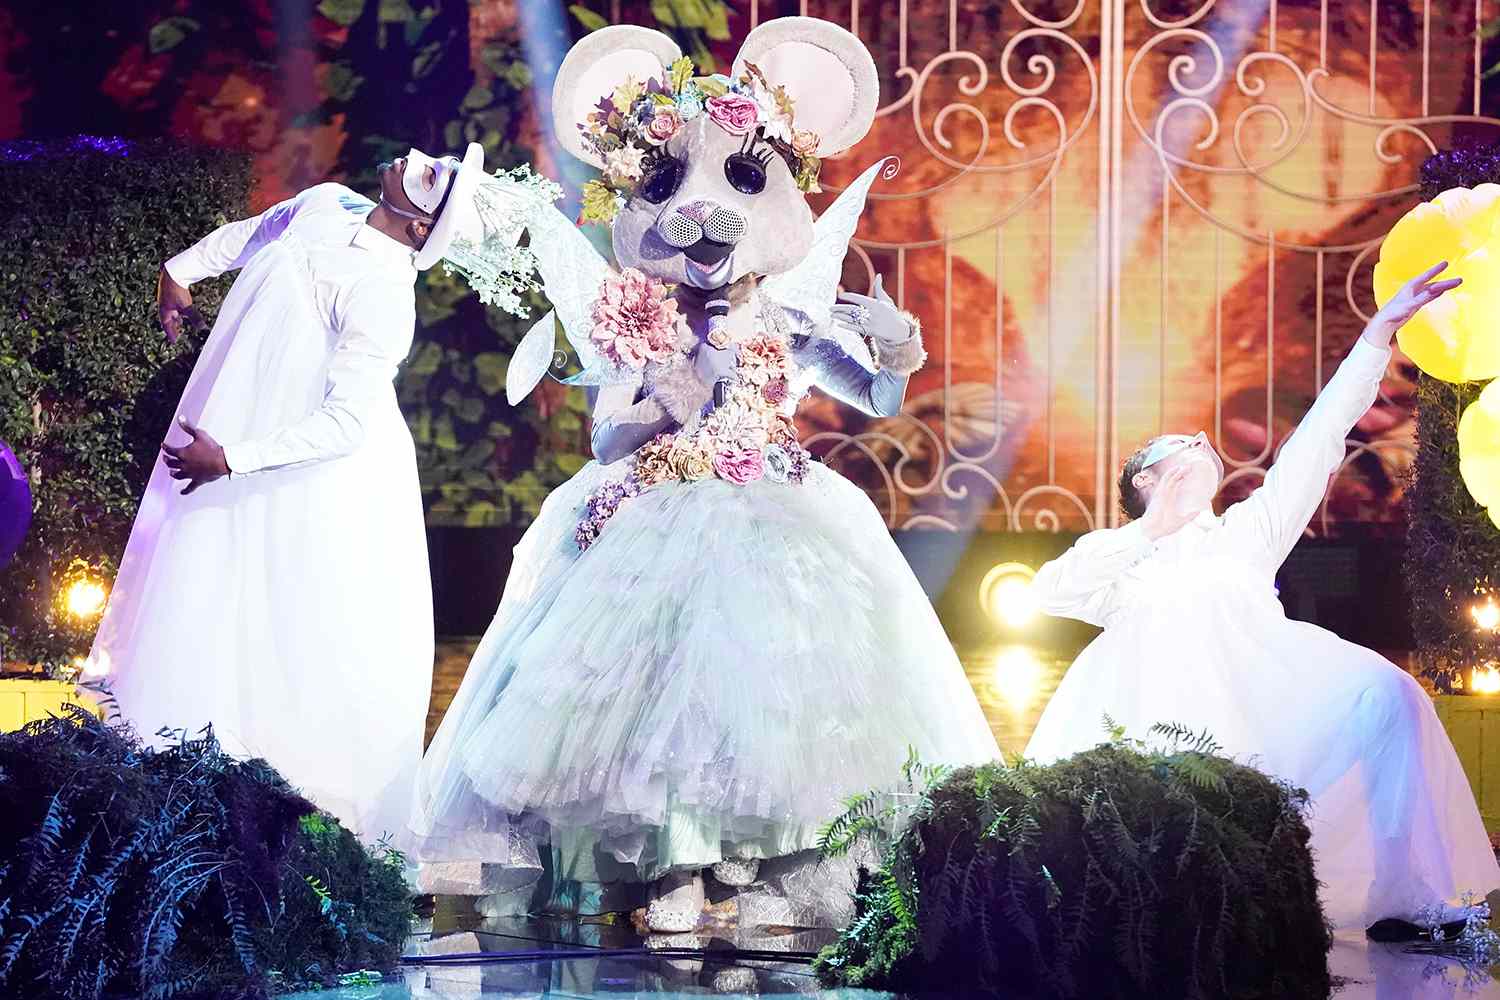 THE MASKED SINGER: The Mouse in the &ldquo;A Brand New Six Pack: Group B Kickoff!&rdquo;